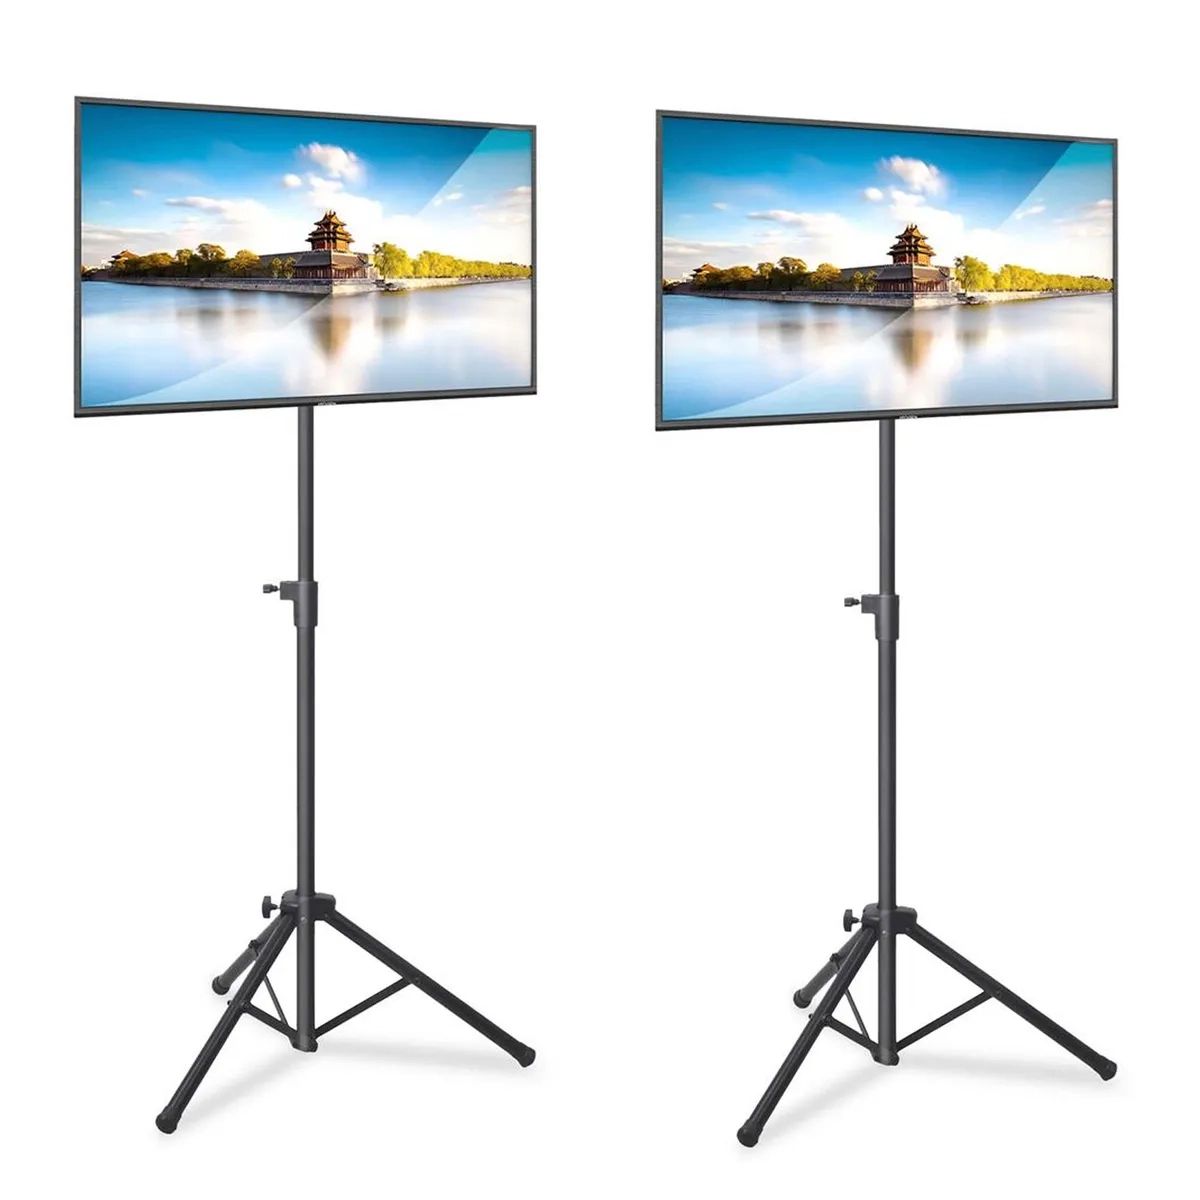 Pyle Foldable Adjustable Height Steel Tripod Flatscreen Tv Stand, Black (2  Pack) | Ebay Intended For Foldable Portable Adjustable Tv Stands (View 4 of 15)